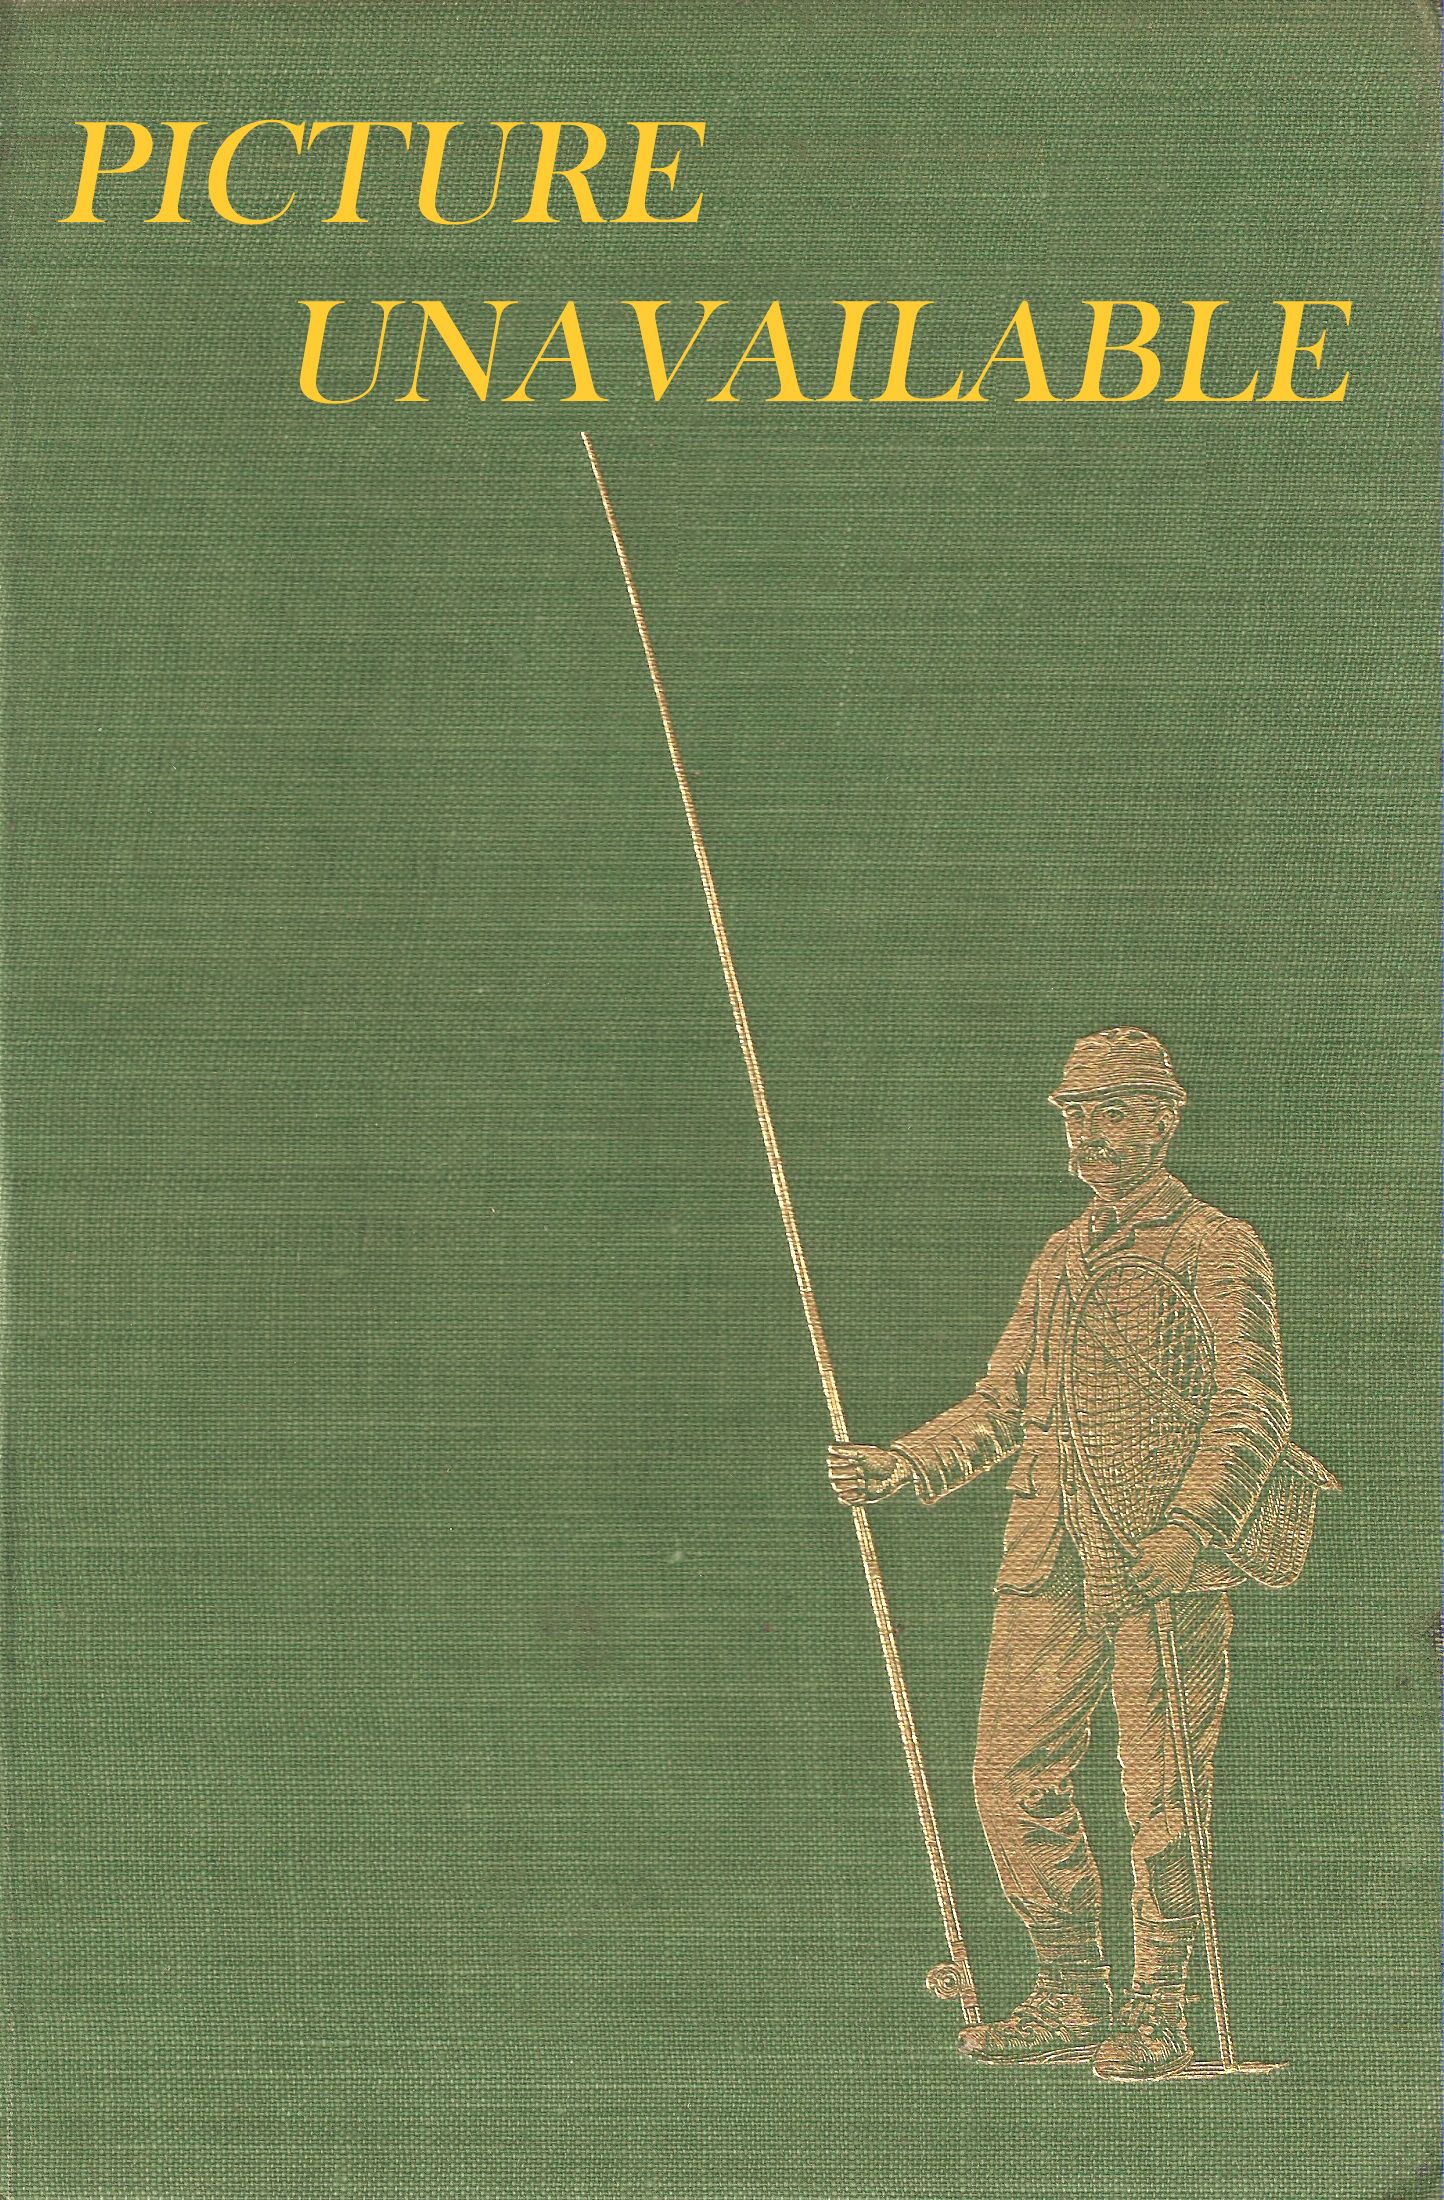 COCH-Y-BONDDU BOOKS. 1999 Catalogue of Books on Fly-Tying: New and  out-of-print, British and American.